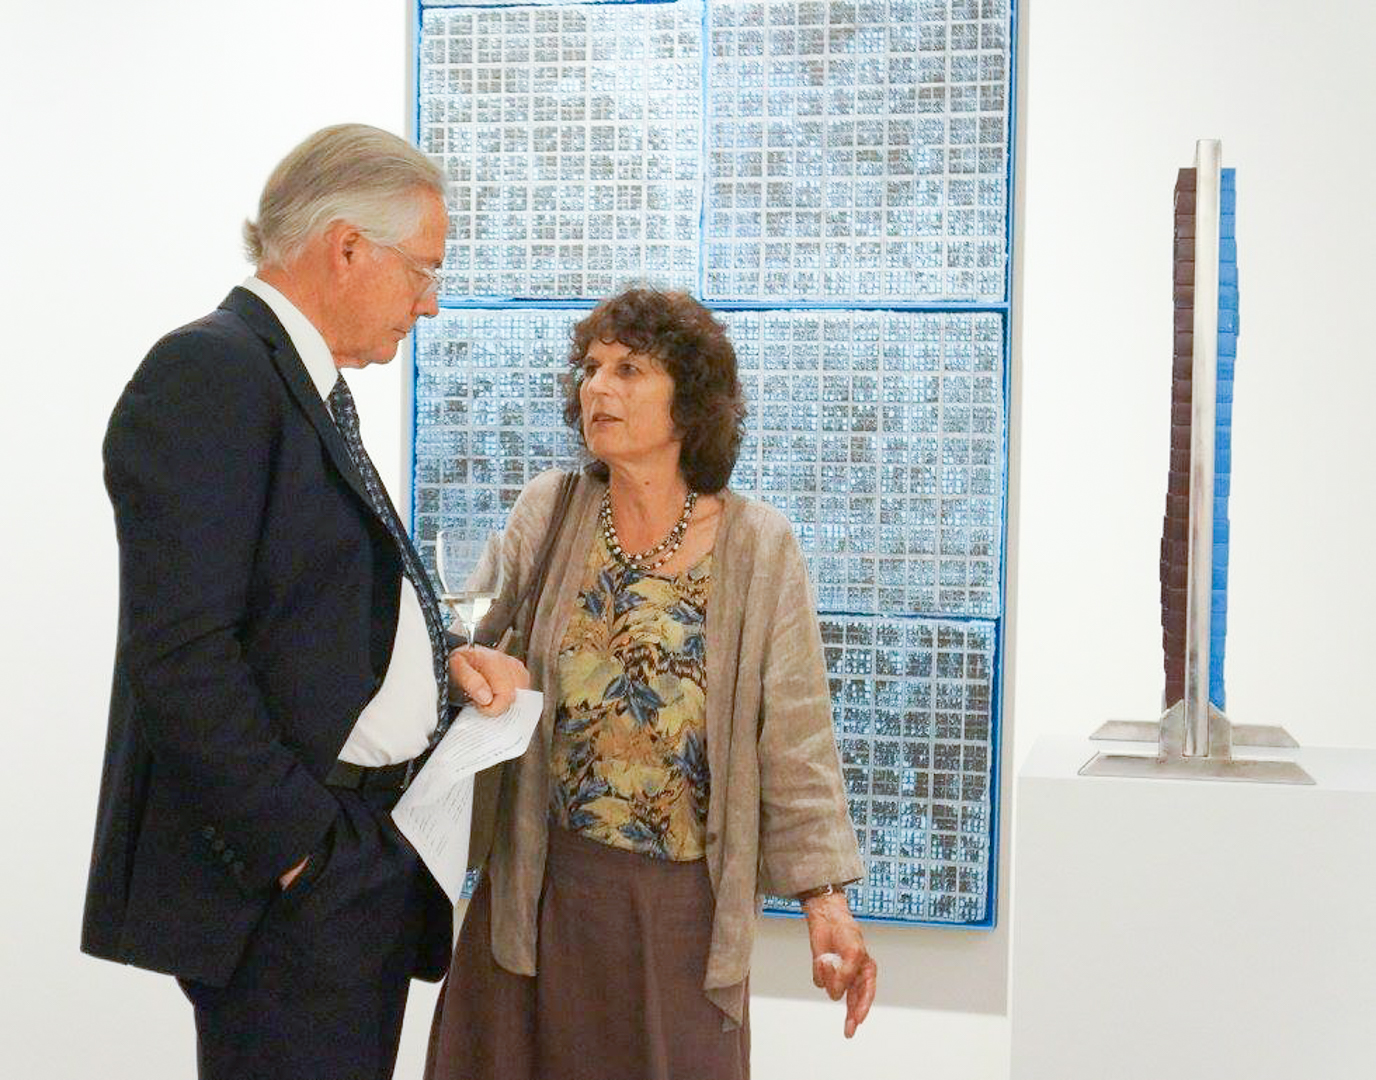 Urban Imprint opening by Dr Elizabeth Farrelly was launched